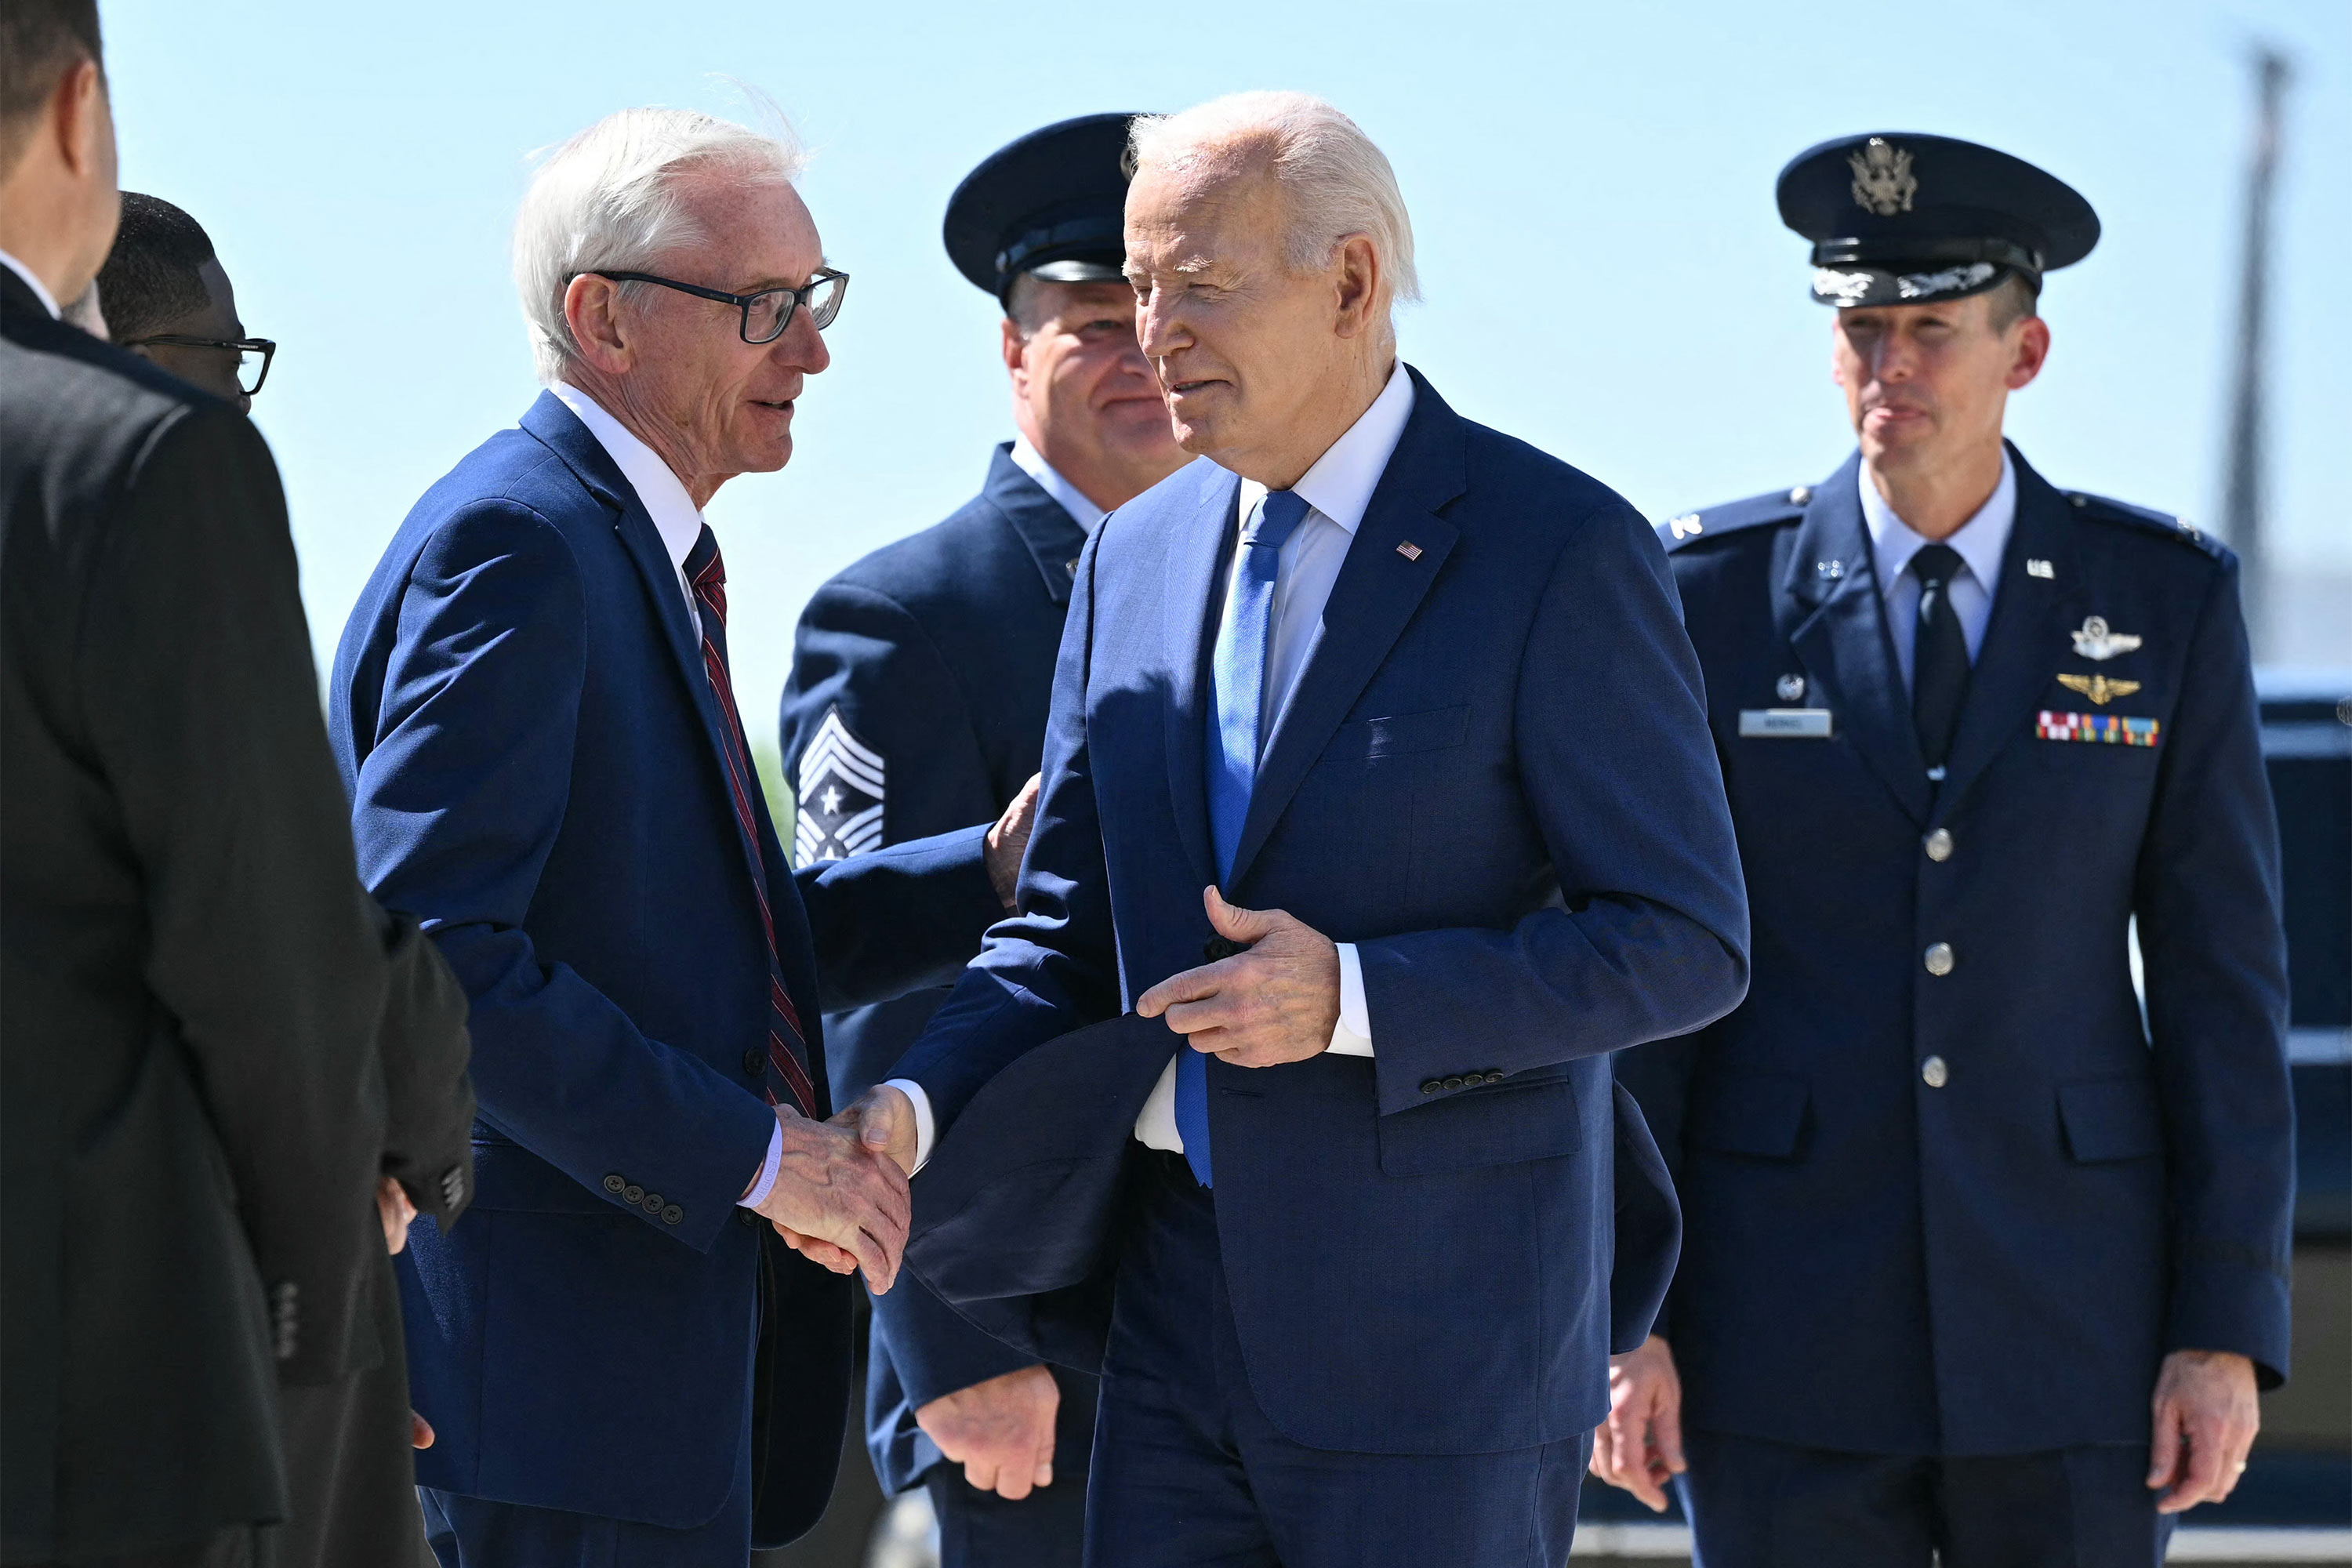 A photo of a man shaking hands with President Biden outside of Air Force One.